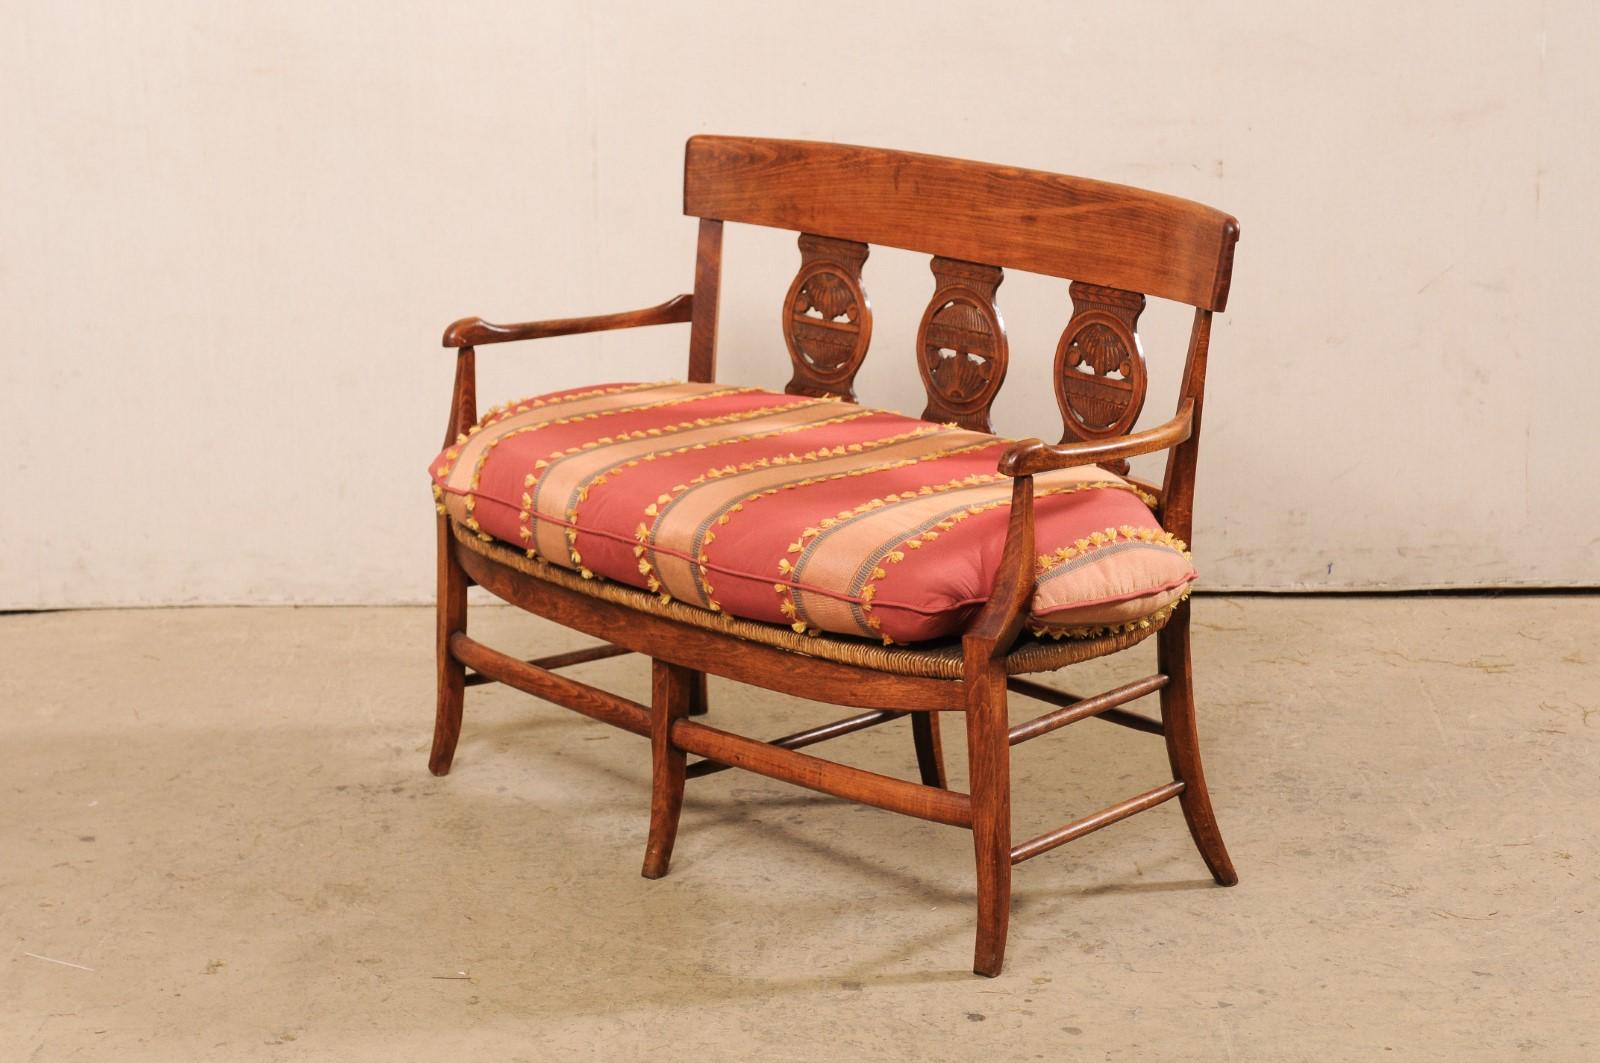 French Country Bench W/Neoclassic Elements Has Rushed Seat & Upholstered Cushion 2